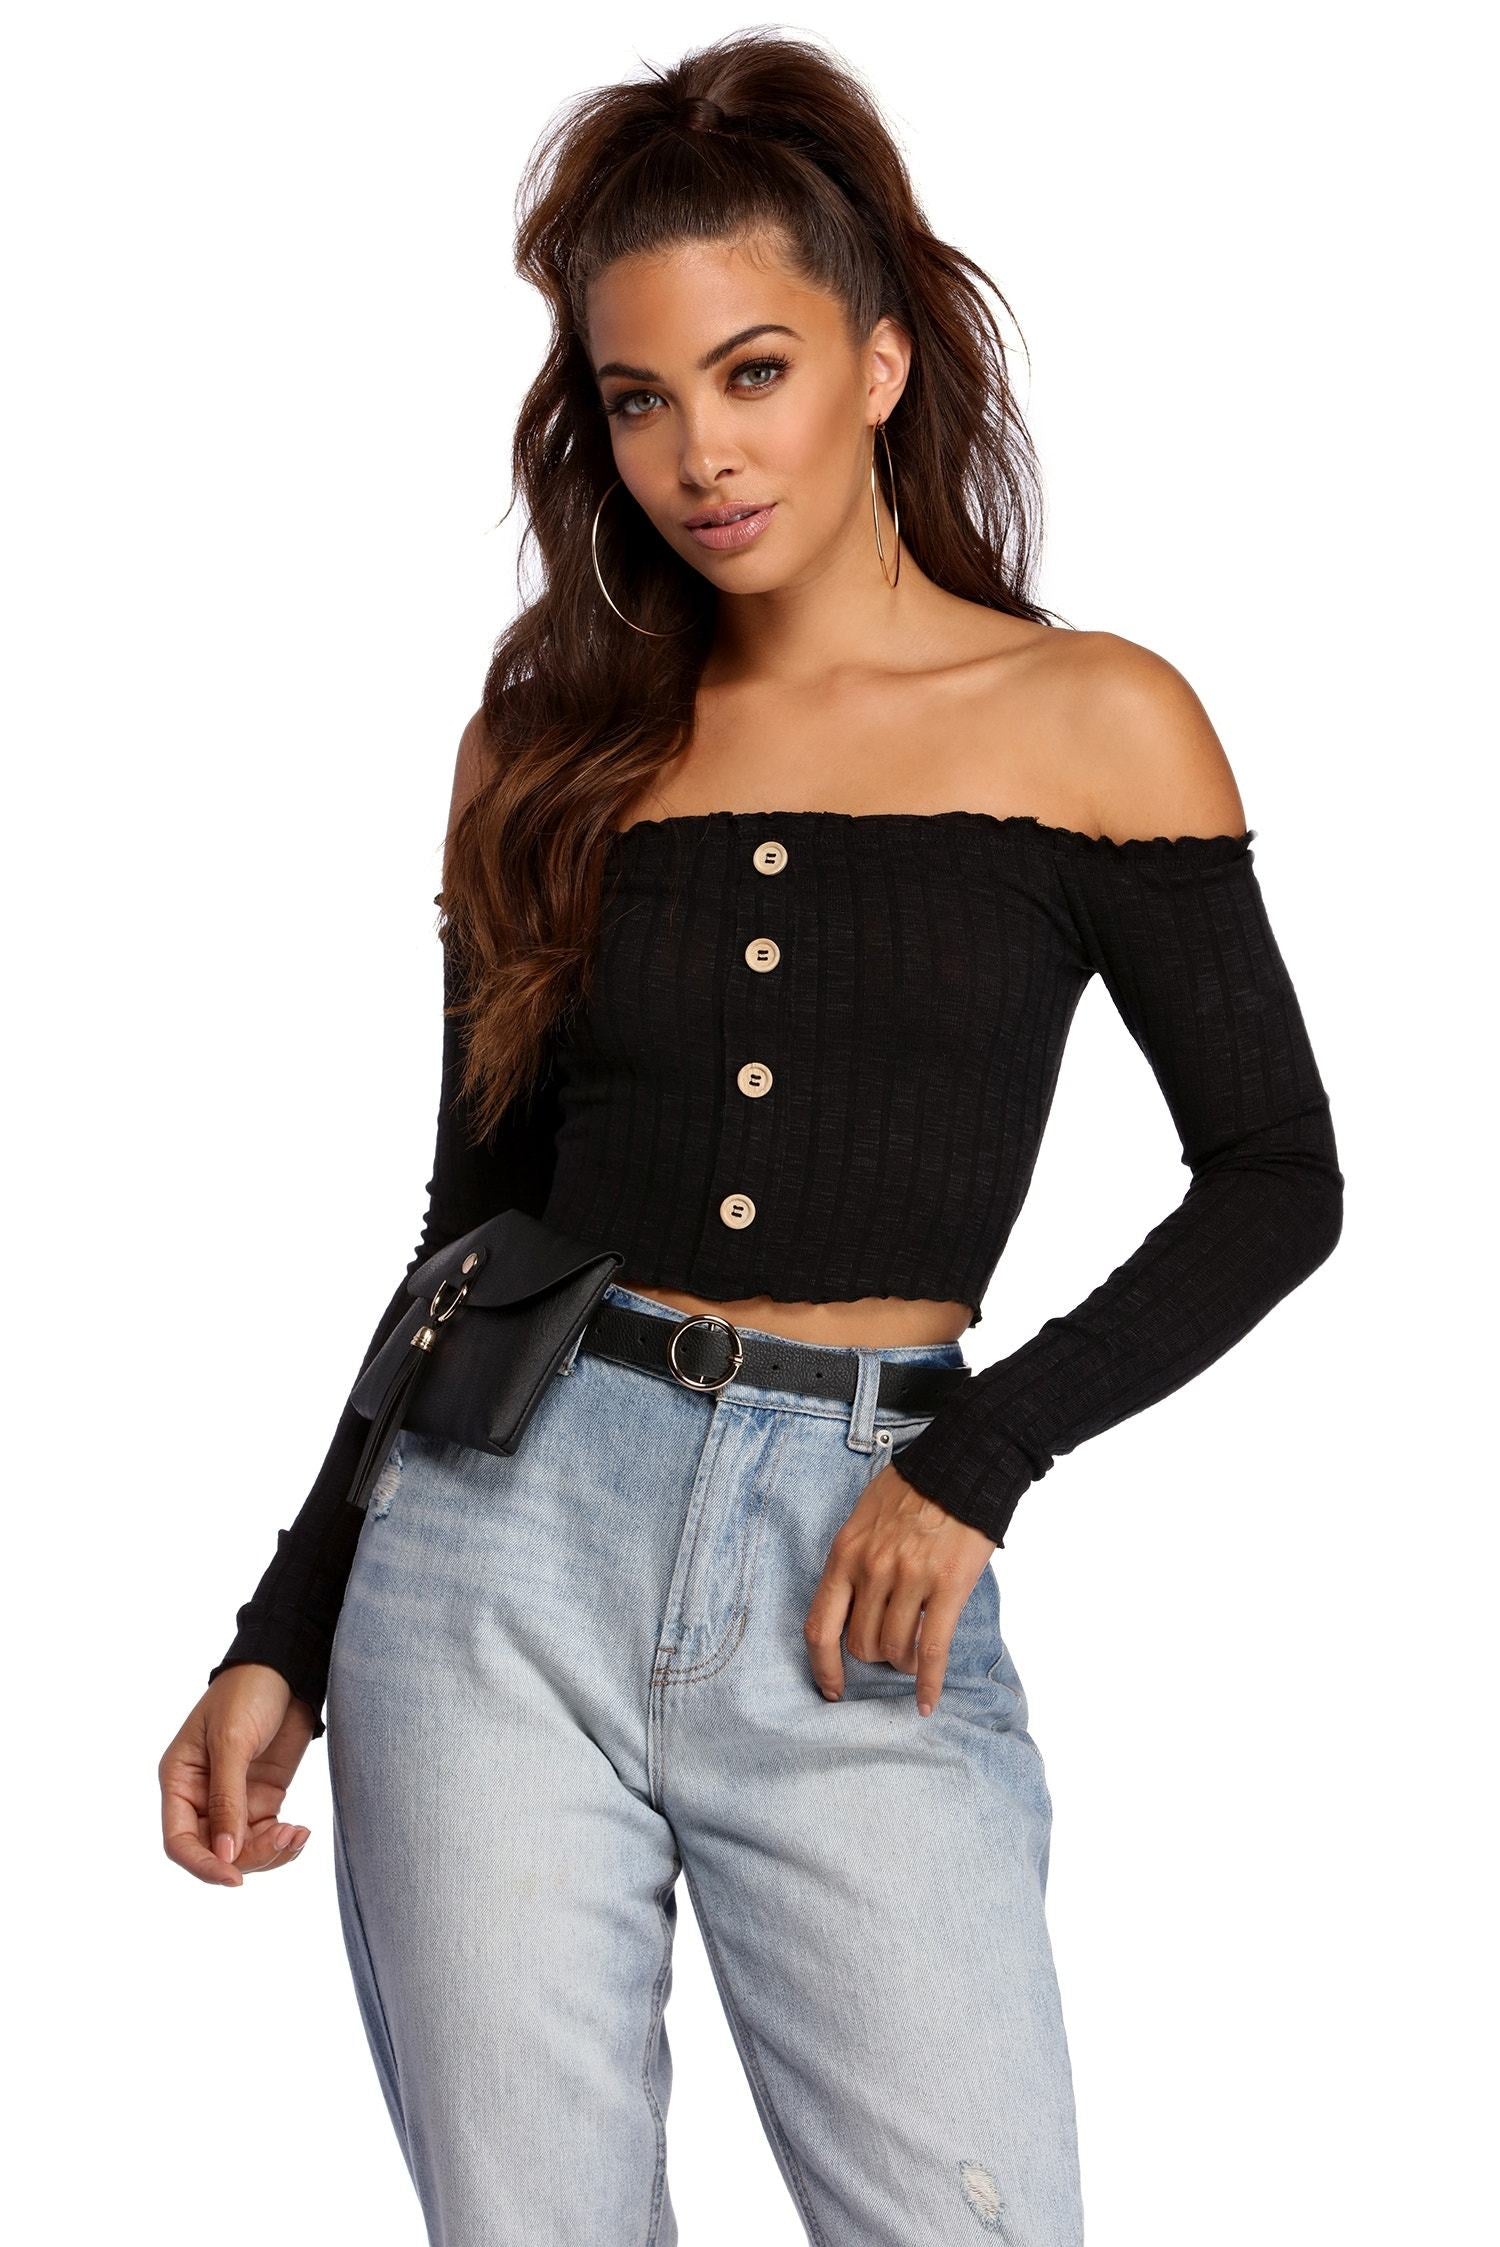 Get Stylish With Knit Crop Top